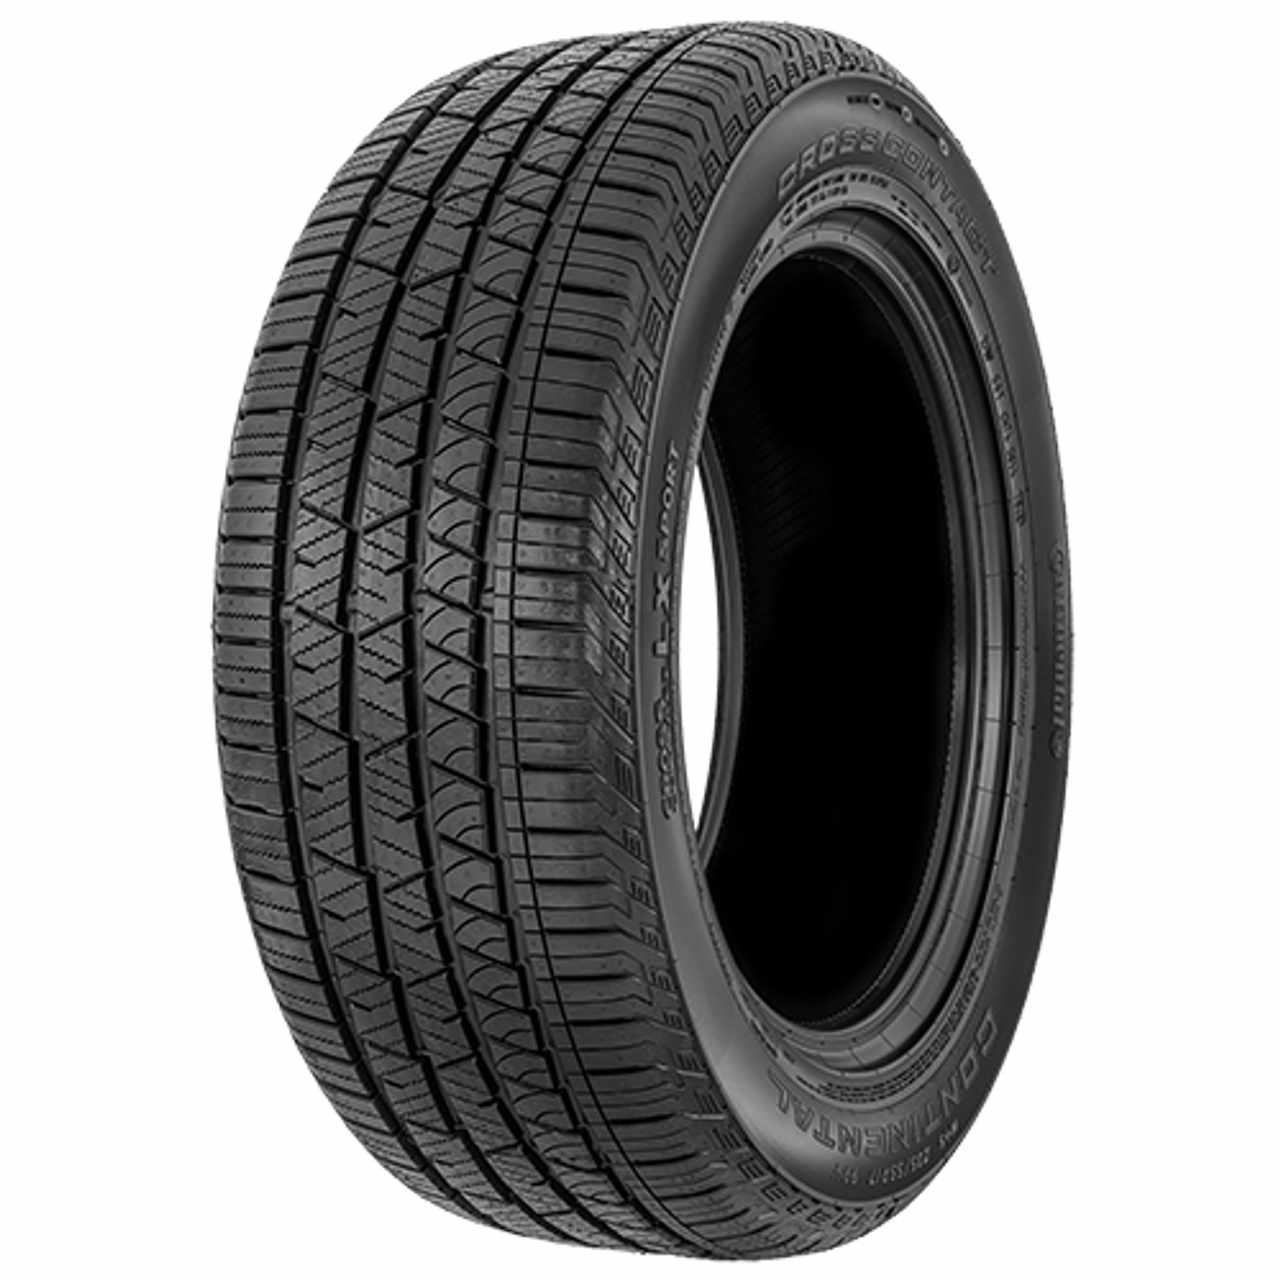 CONTINENTAL CROSSCONTACT LX SPORT (AO) (EVc) 235/50R18 97H FR BSW von Continental